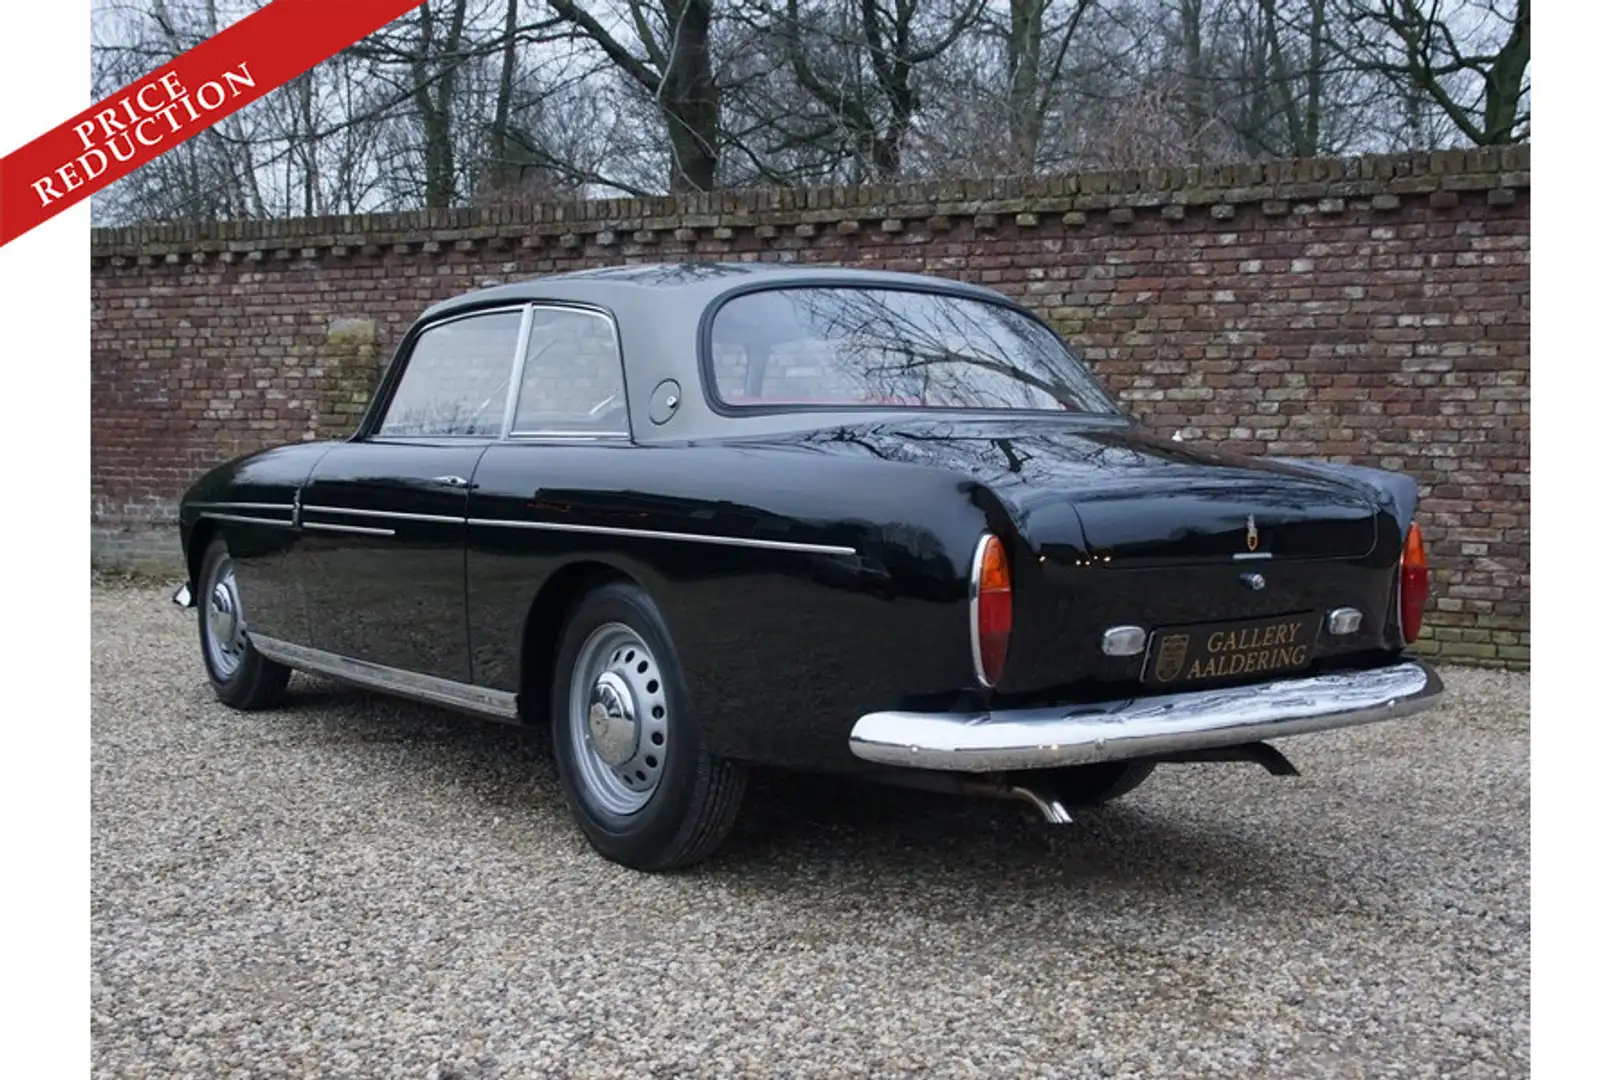 Bristol 408 Saloon PRICE REDUCTION One of only 83 examples mad Nero - 2